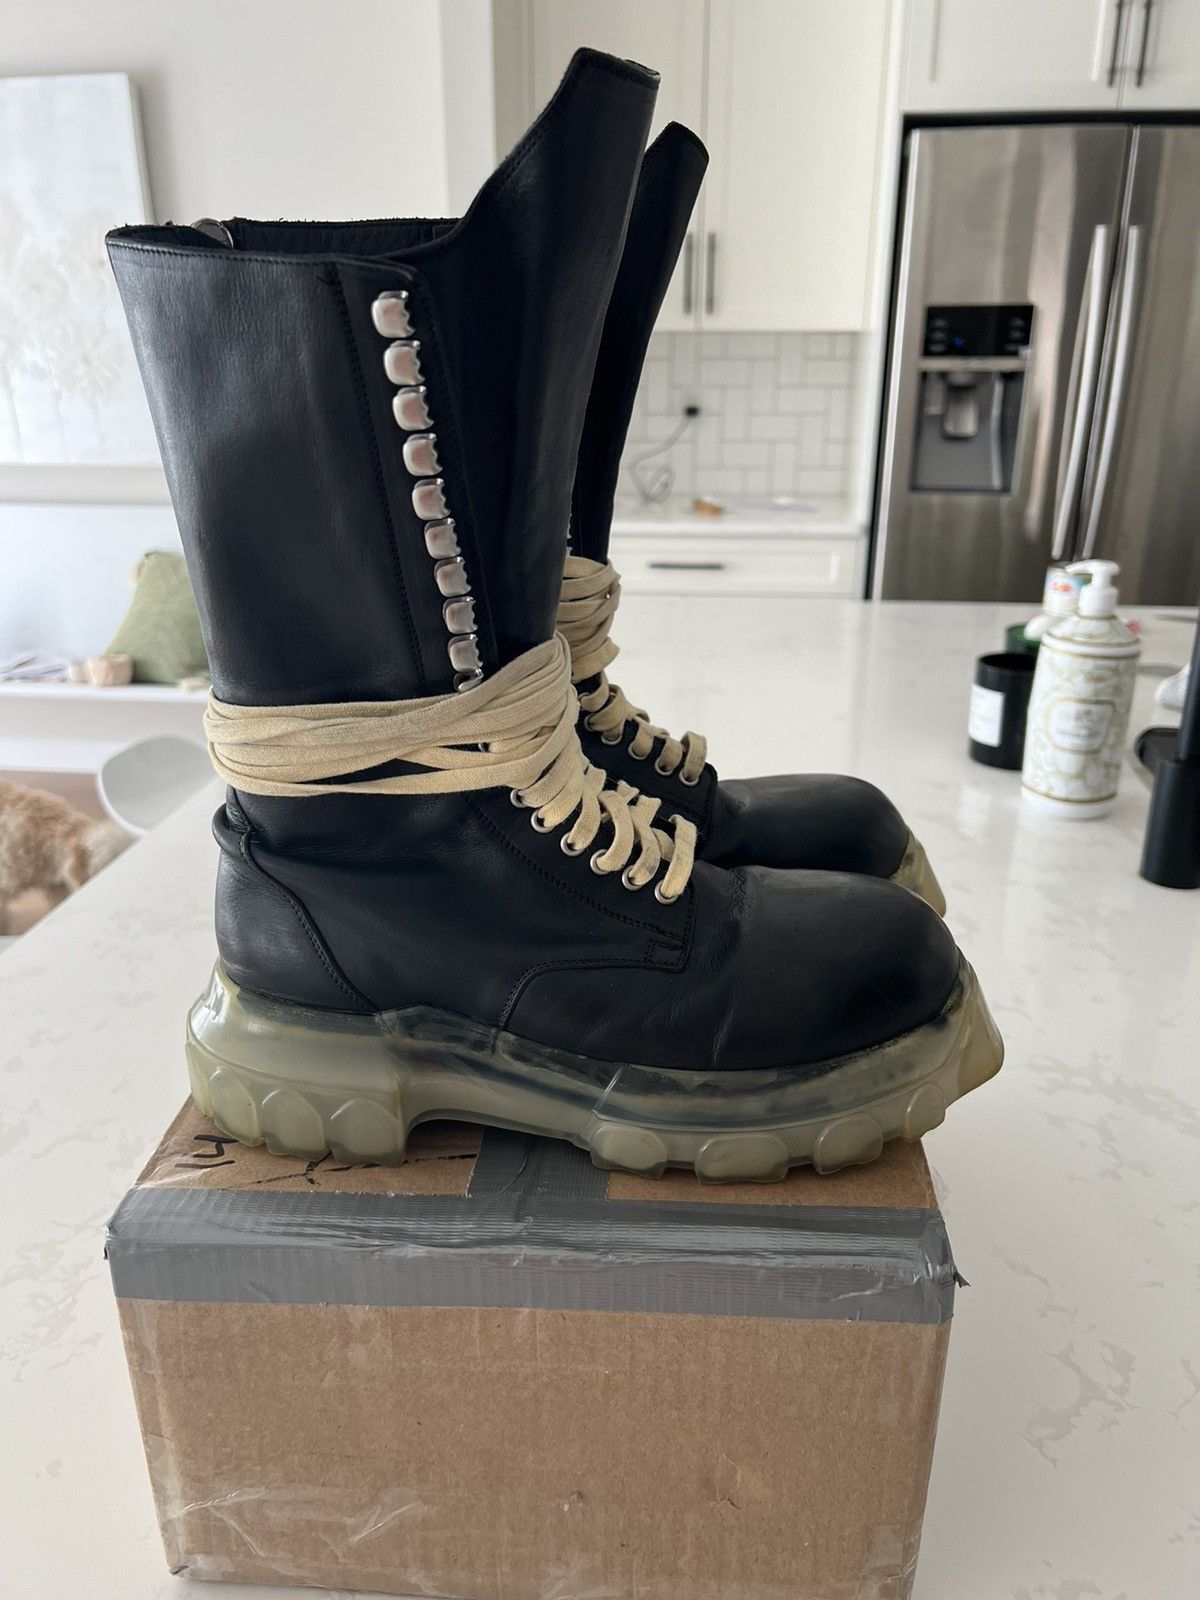 Rick Owens Bozo beetle tractor boot lace up | Grailed